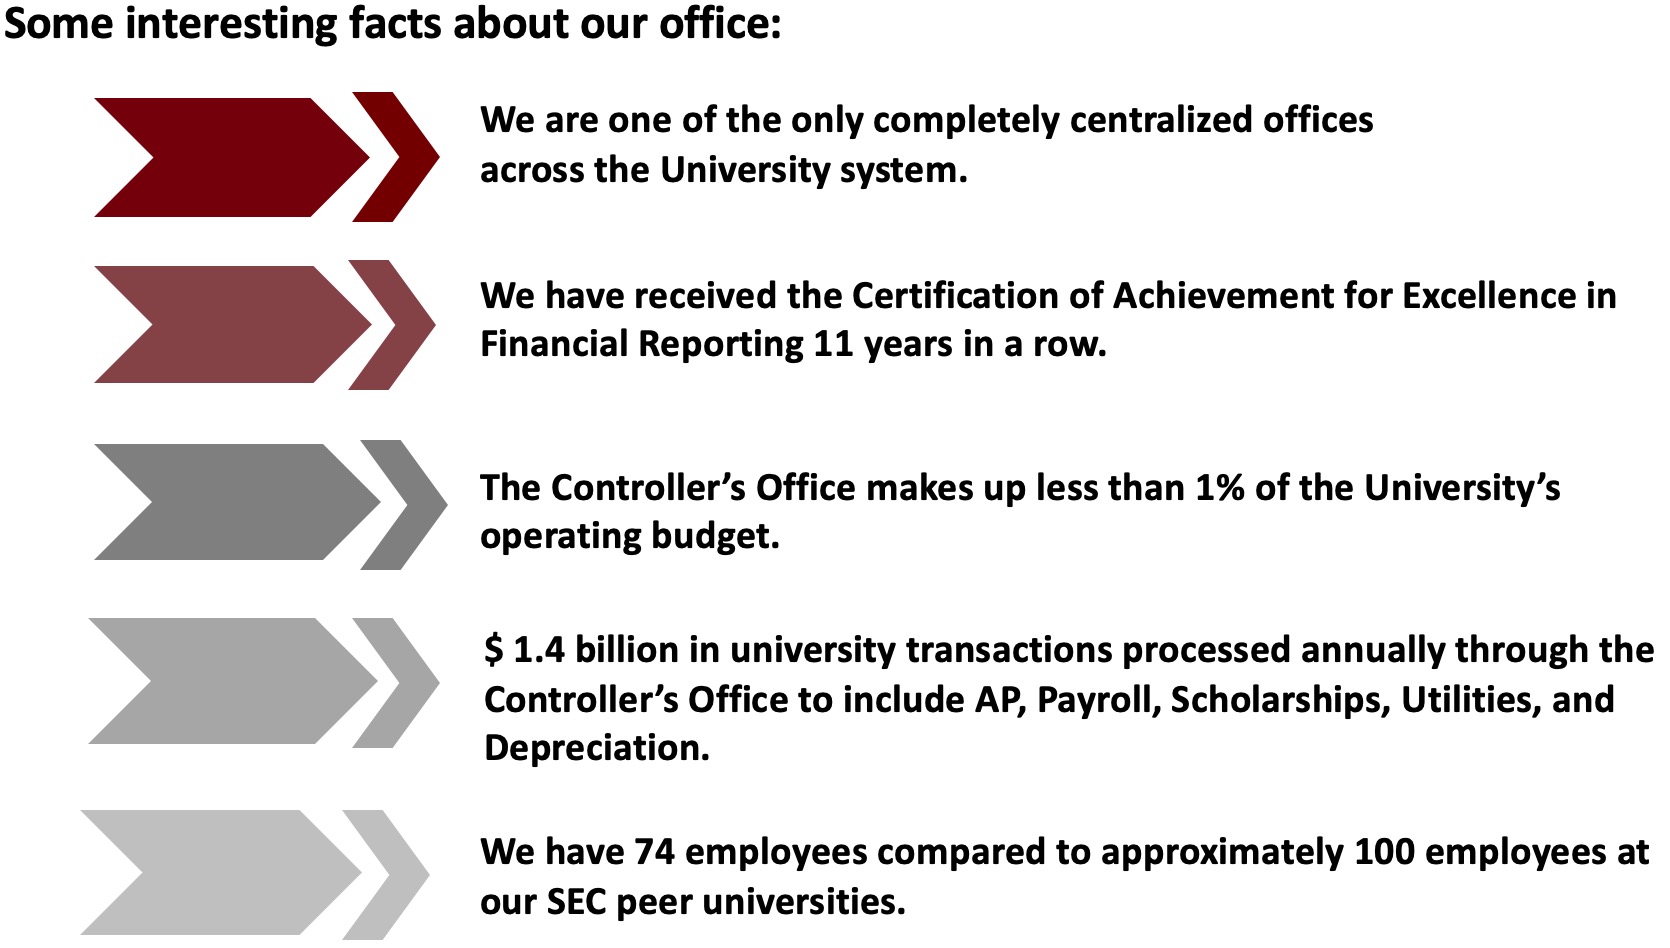 Here are some interesting facts about the Office of the Controller. We are one of the only completely centralized offices across the University system. We have received the Certification of Achievement for Excellence in Financial Reporting 11 years in a row. The Controller’s Office makes up less than 1% of the University’s operating budget. $ 1.4 billion in university transactions processed annually through the Controller’s Office to include AP, Payroll, Scholarships, Utilities, and Depreciation. We have 74 employees compared to approximately 100 employees at our SEC peer universities.